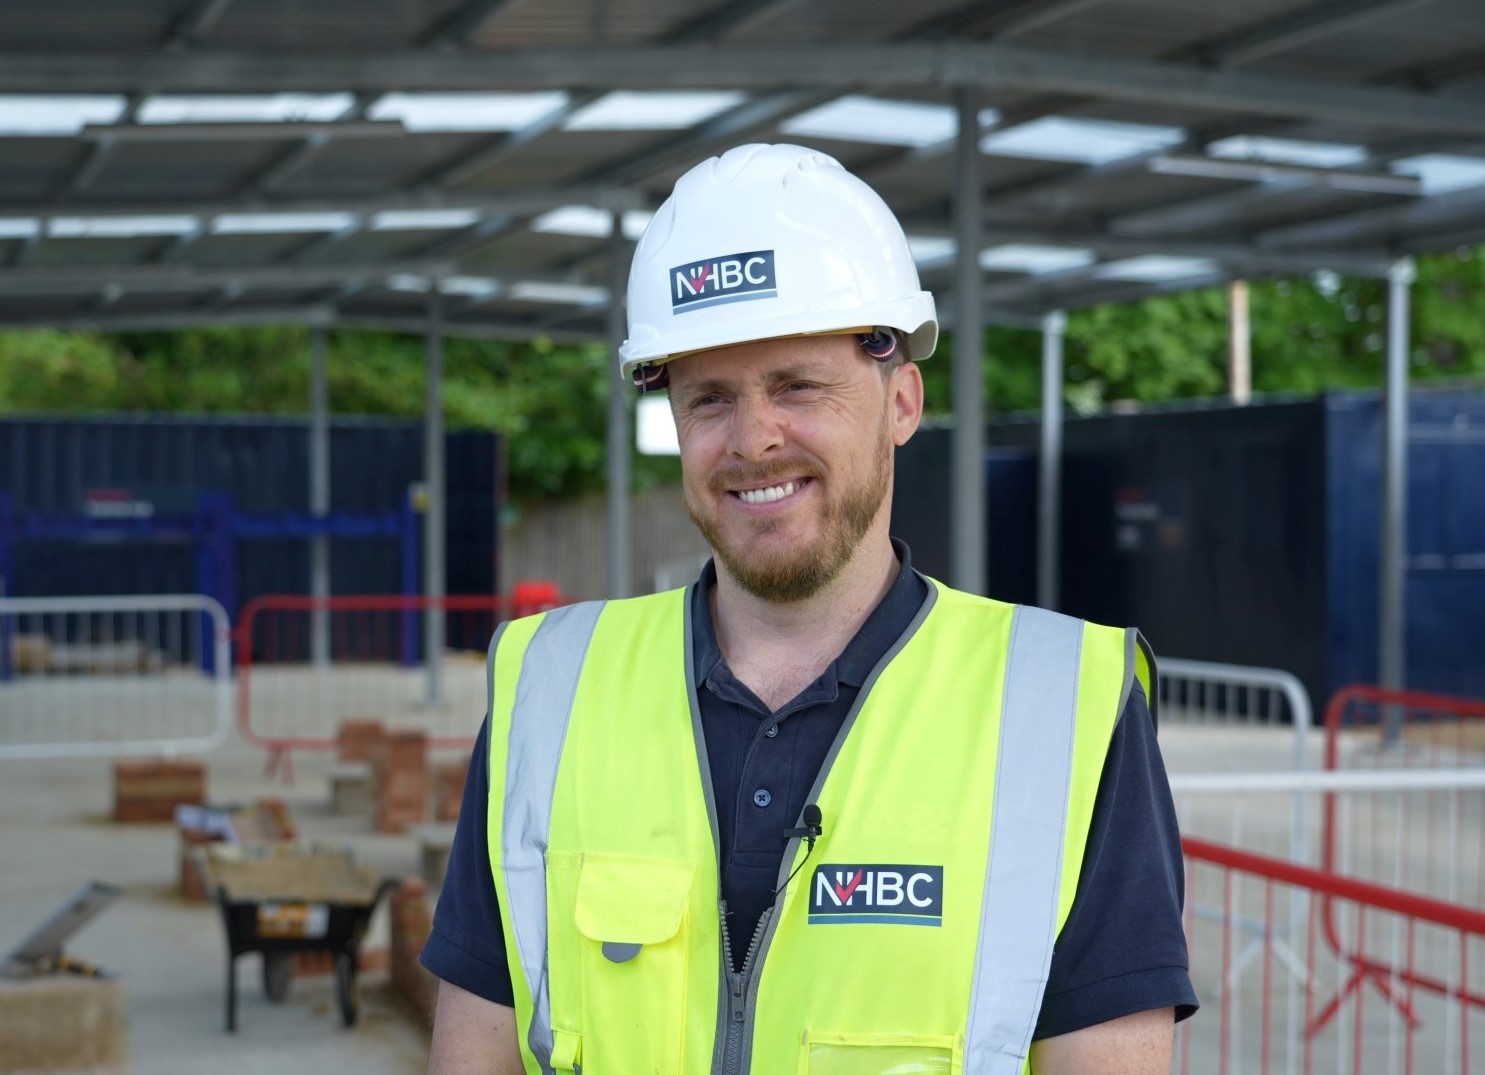 a photo of a man called matt smiling at the camera while wearing site safety clothing